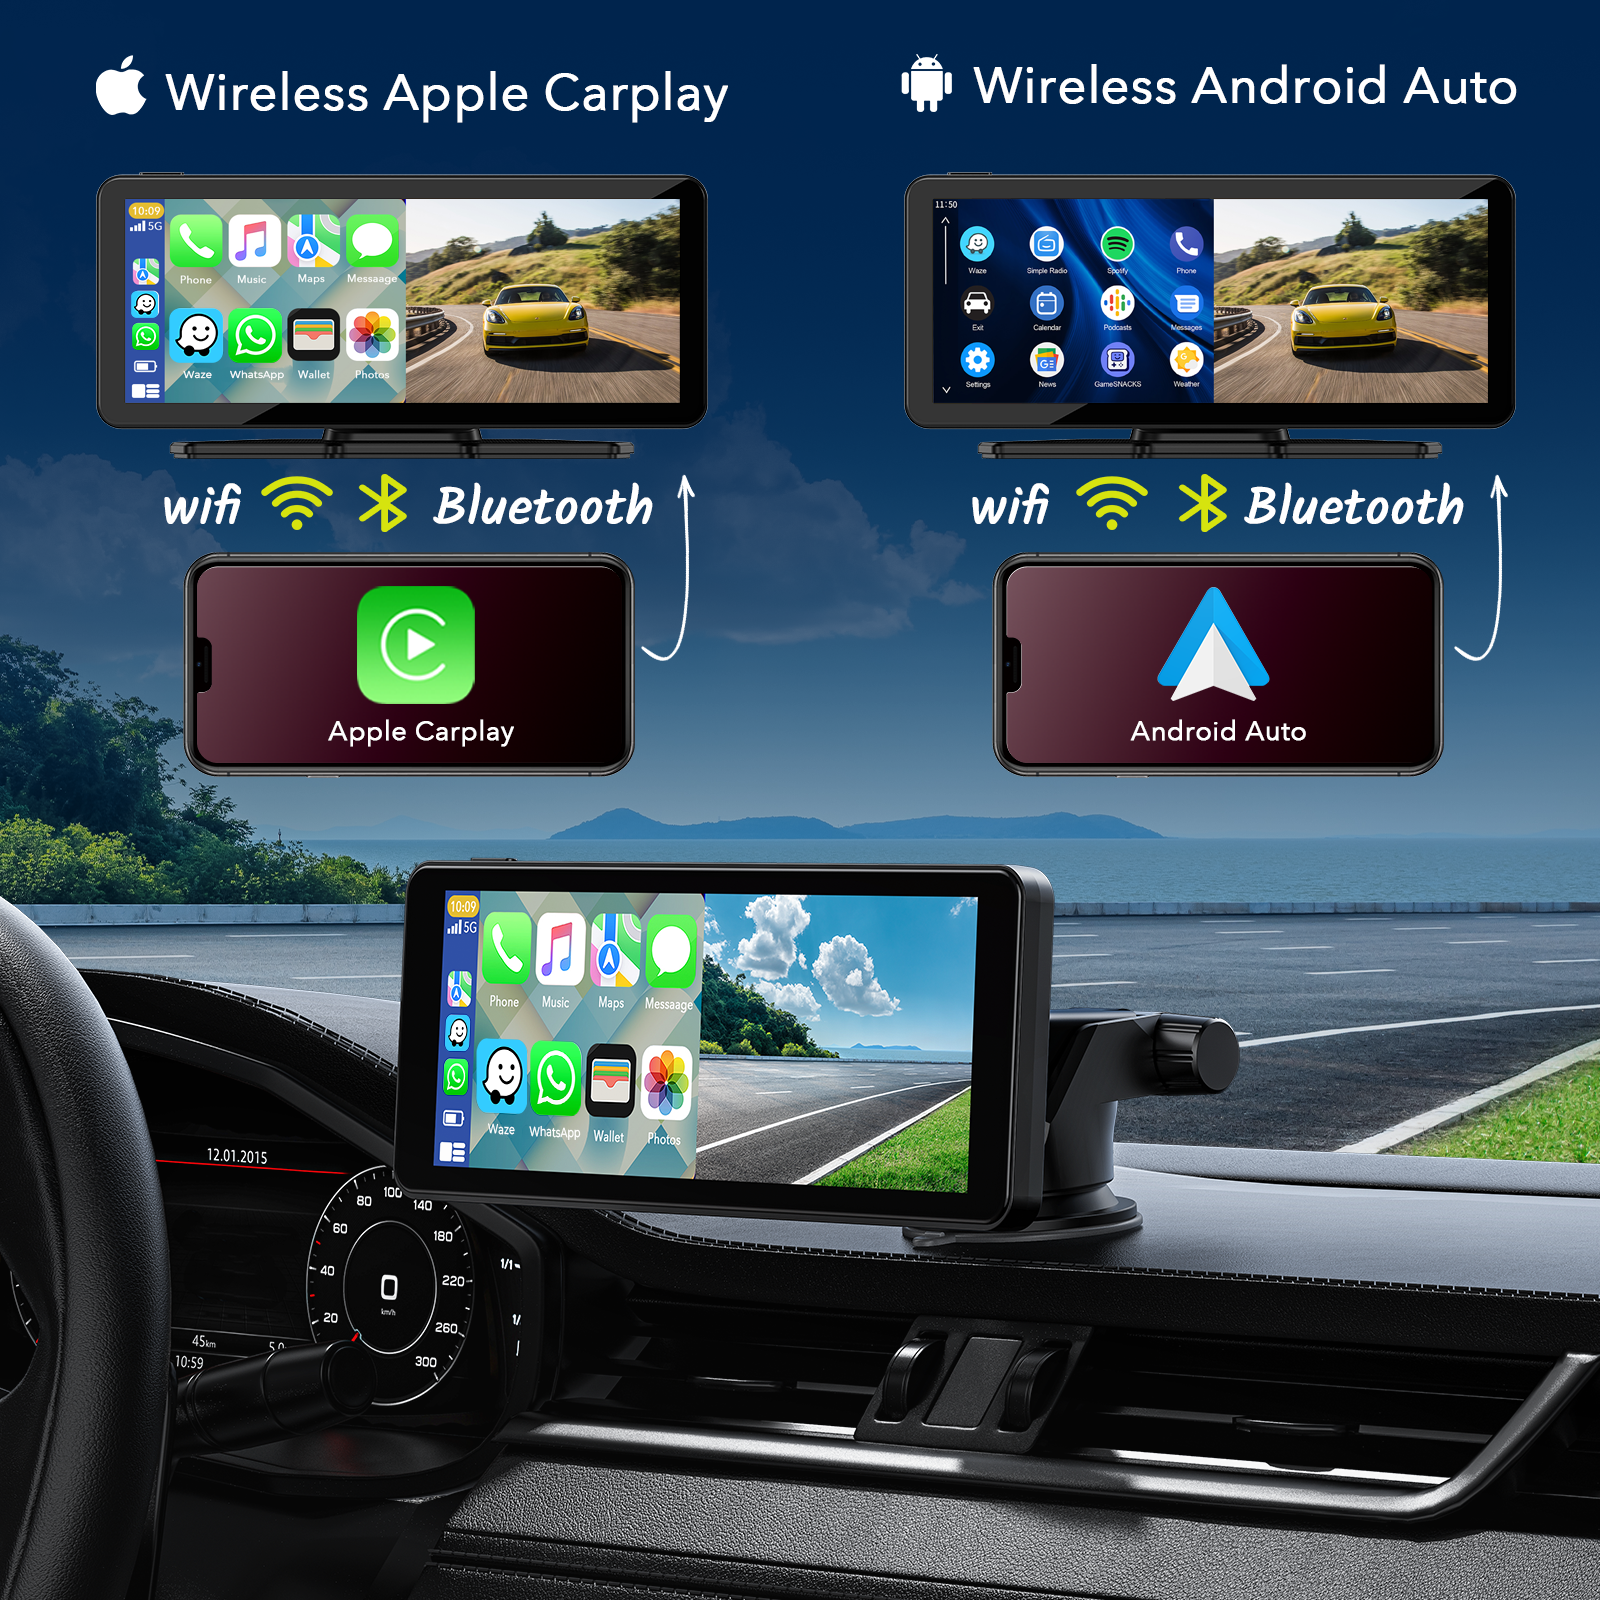 6.86" Portable Wireless Car Stereo Receiver Carplay & Android Auto Screen with 2.5K Dash Cam, 1080P Backup Camera, 64GB SD Card, GPS Navigation, AirPlay, AUX/FM, Googel, Siri\